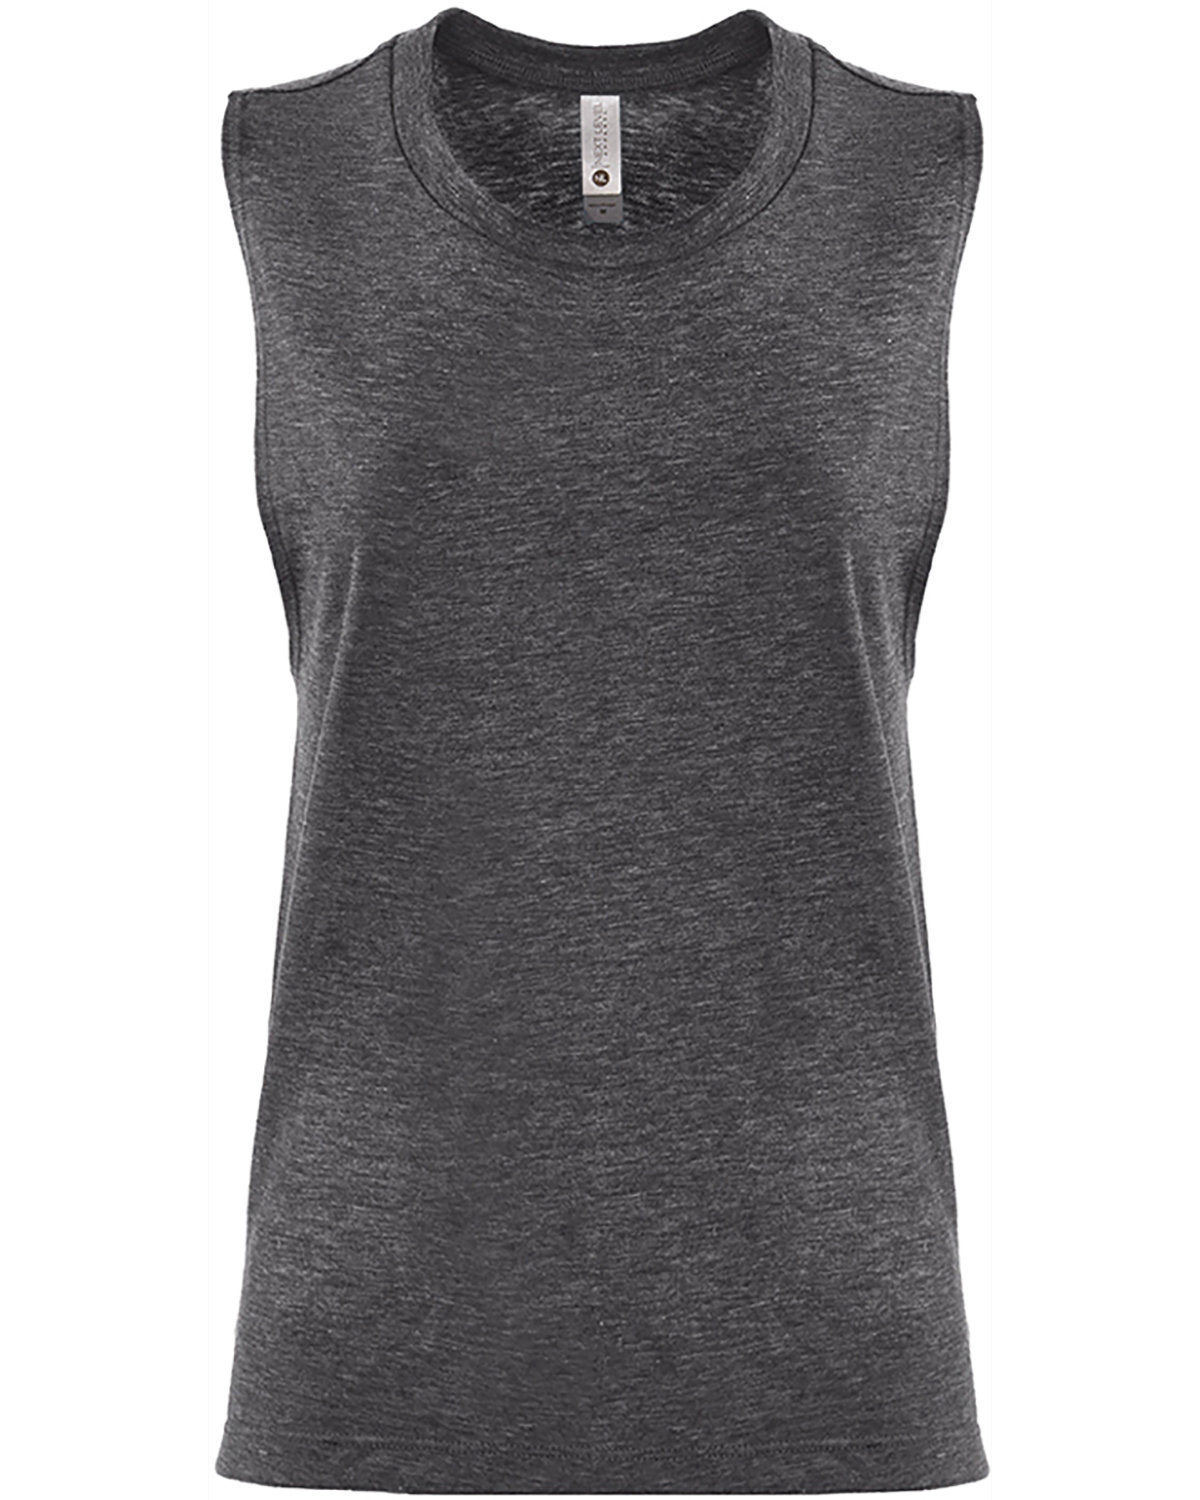 Branded Next Level ™ Women’s Festival Muscle Tank Charcoal